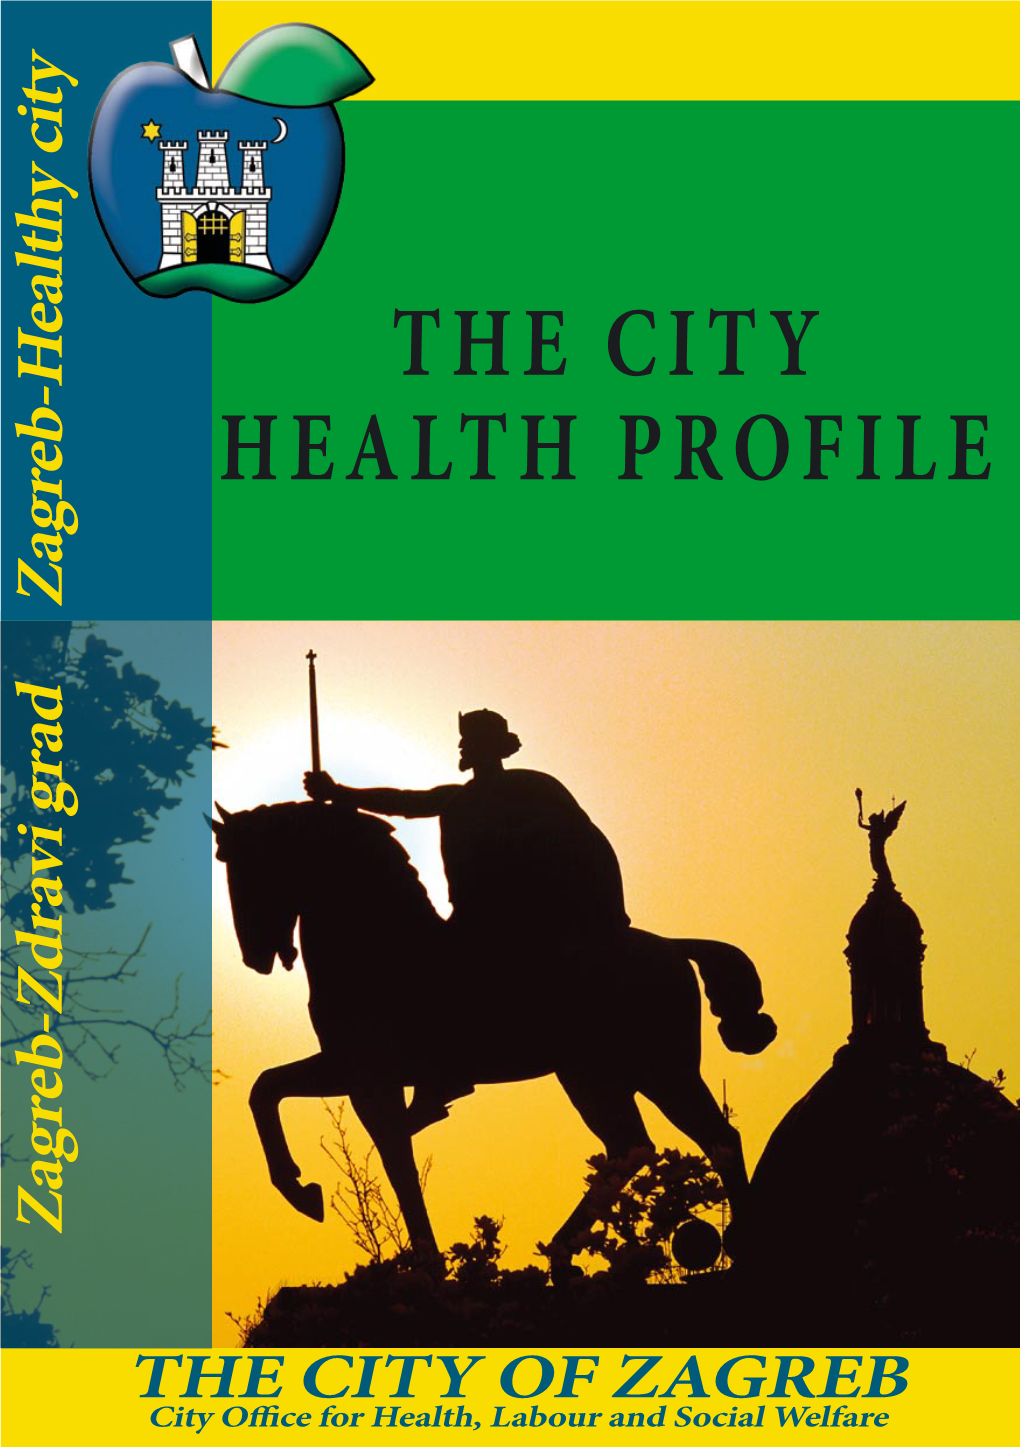 The City Health Profile and the City Health Plan